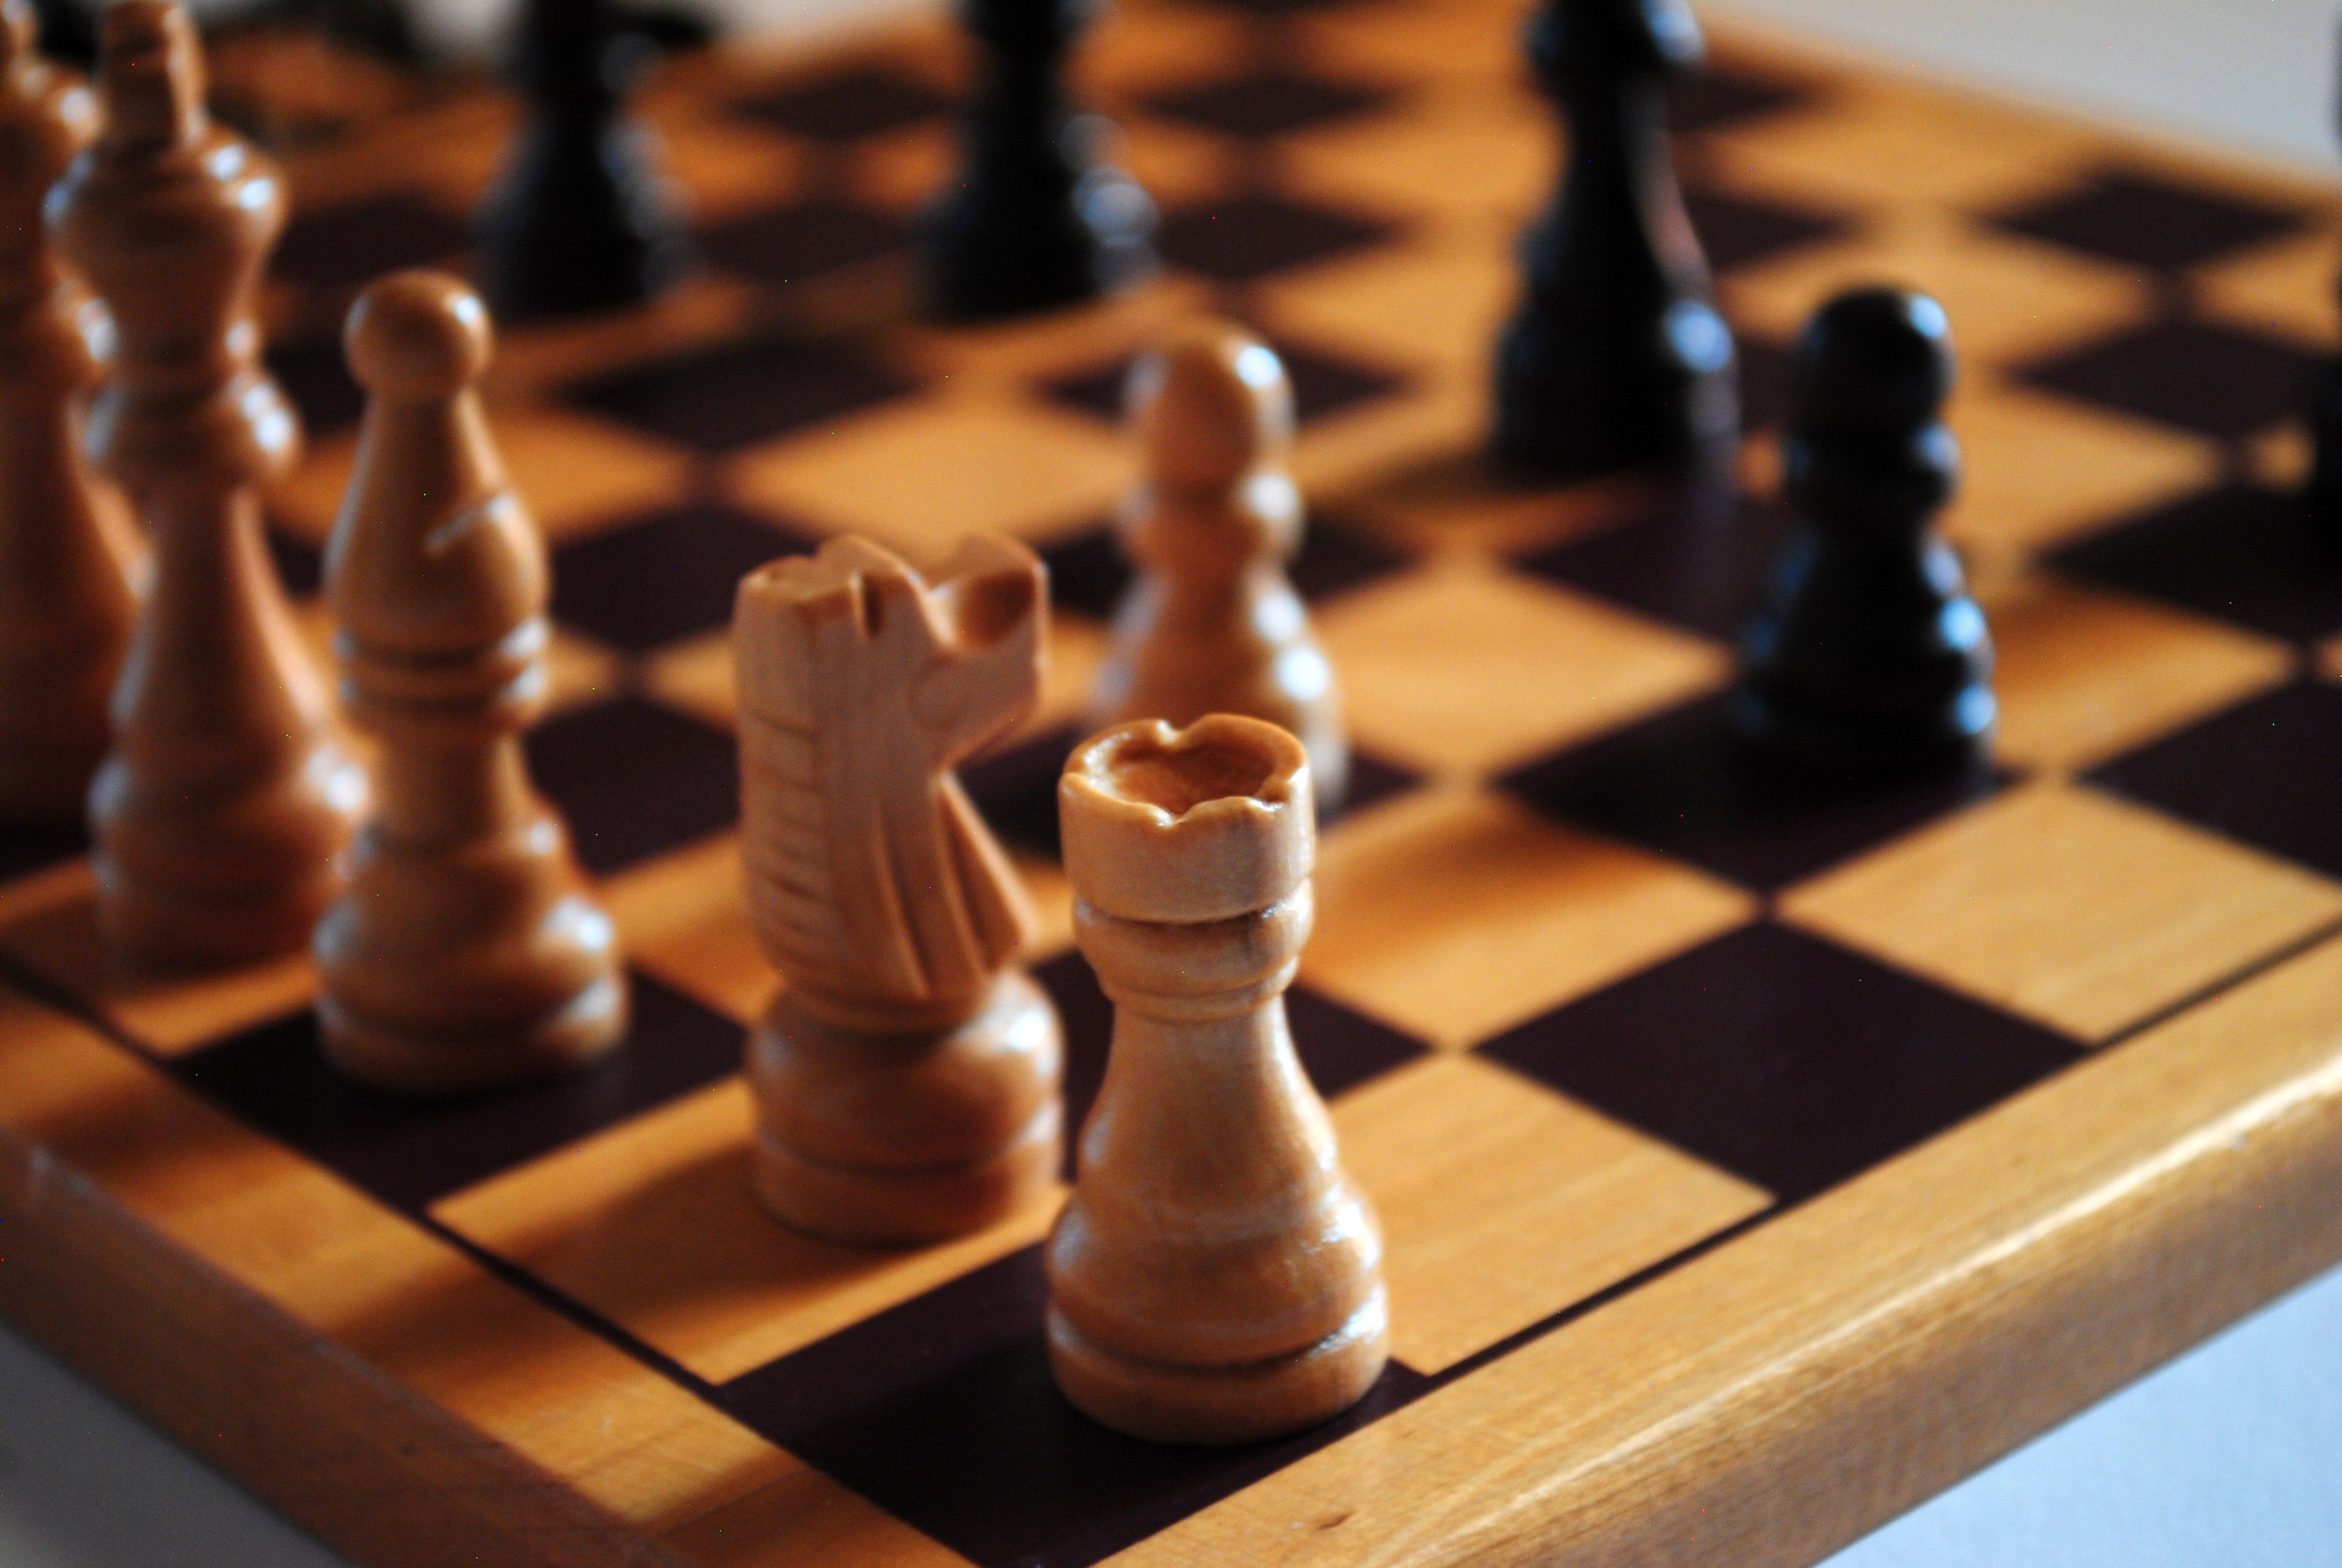 Old Robert claimed he lived alone, but Andrew grew suspicious after seeing an unfinished game of chess on his table. | Source: Unsplash